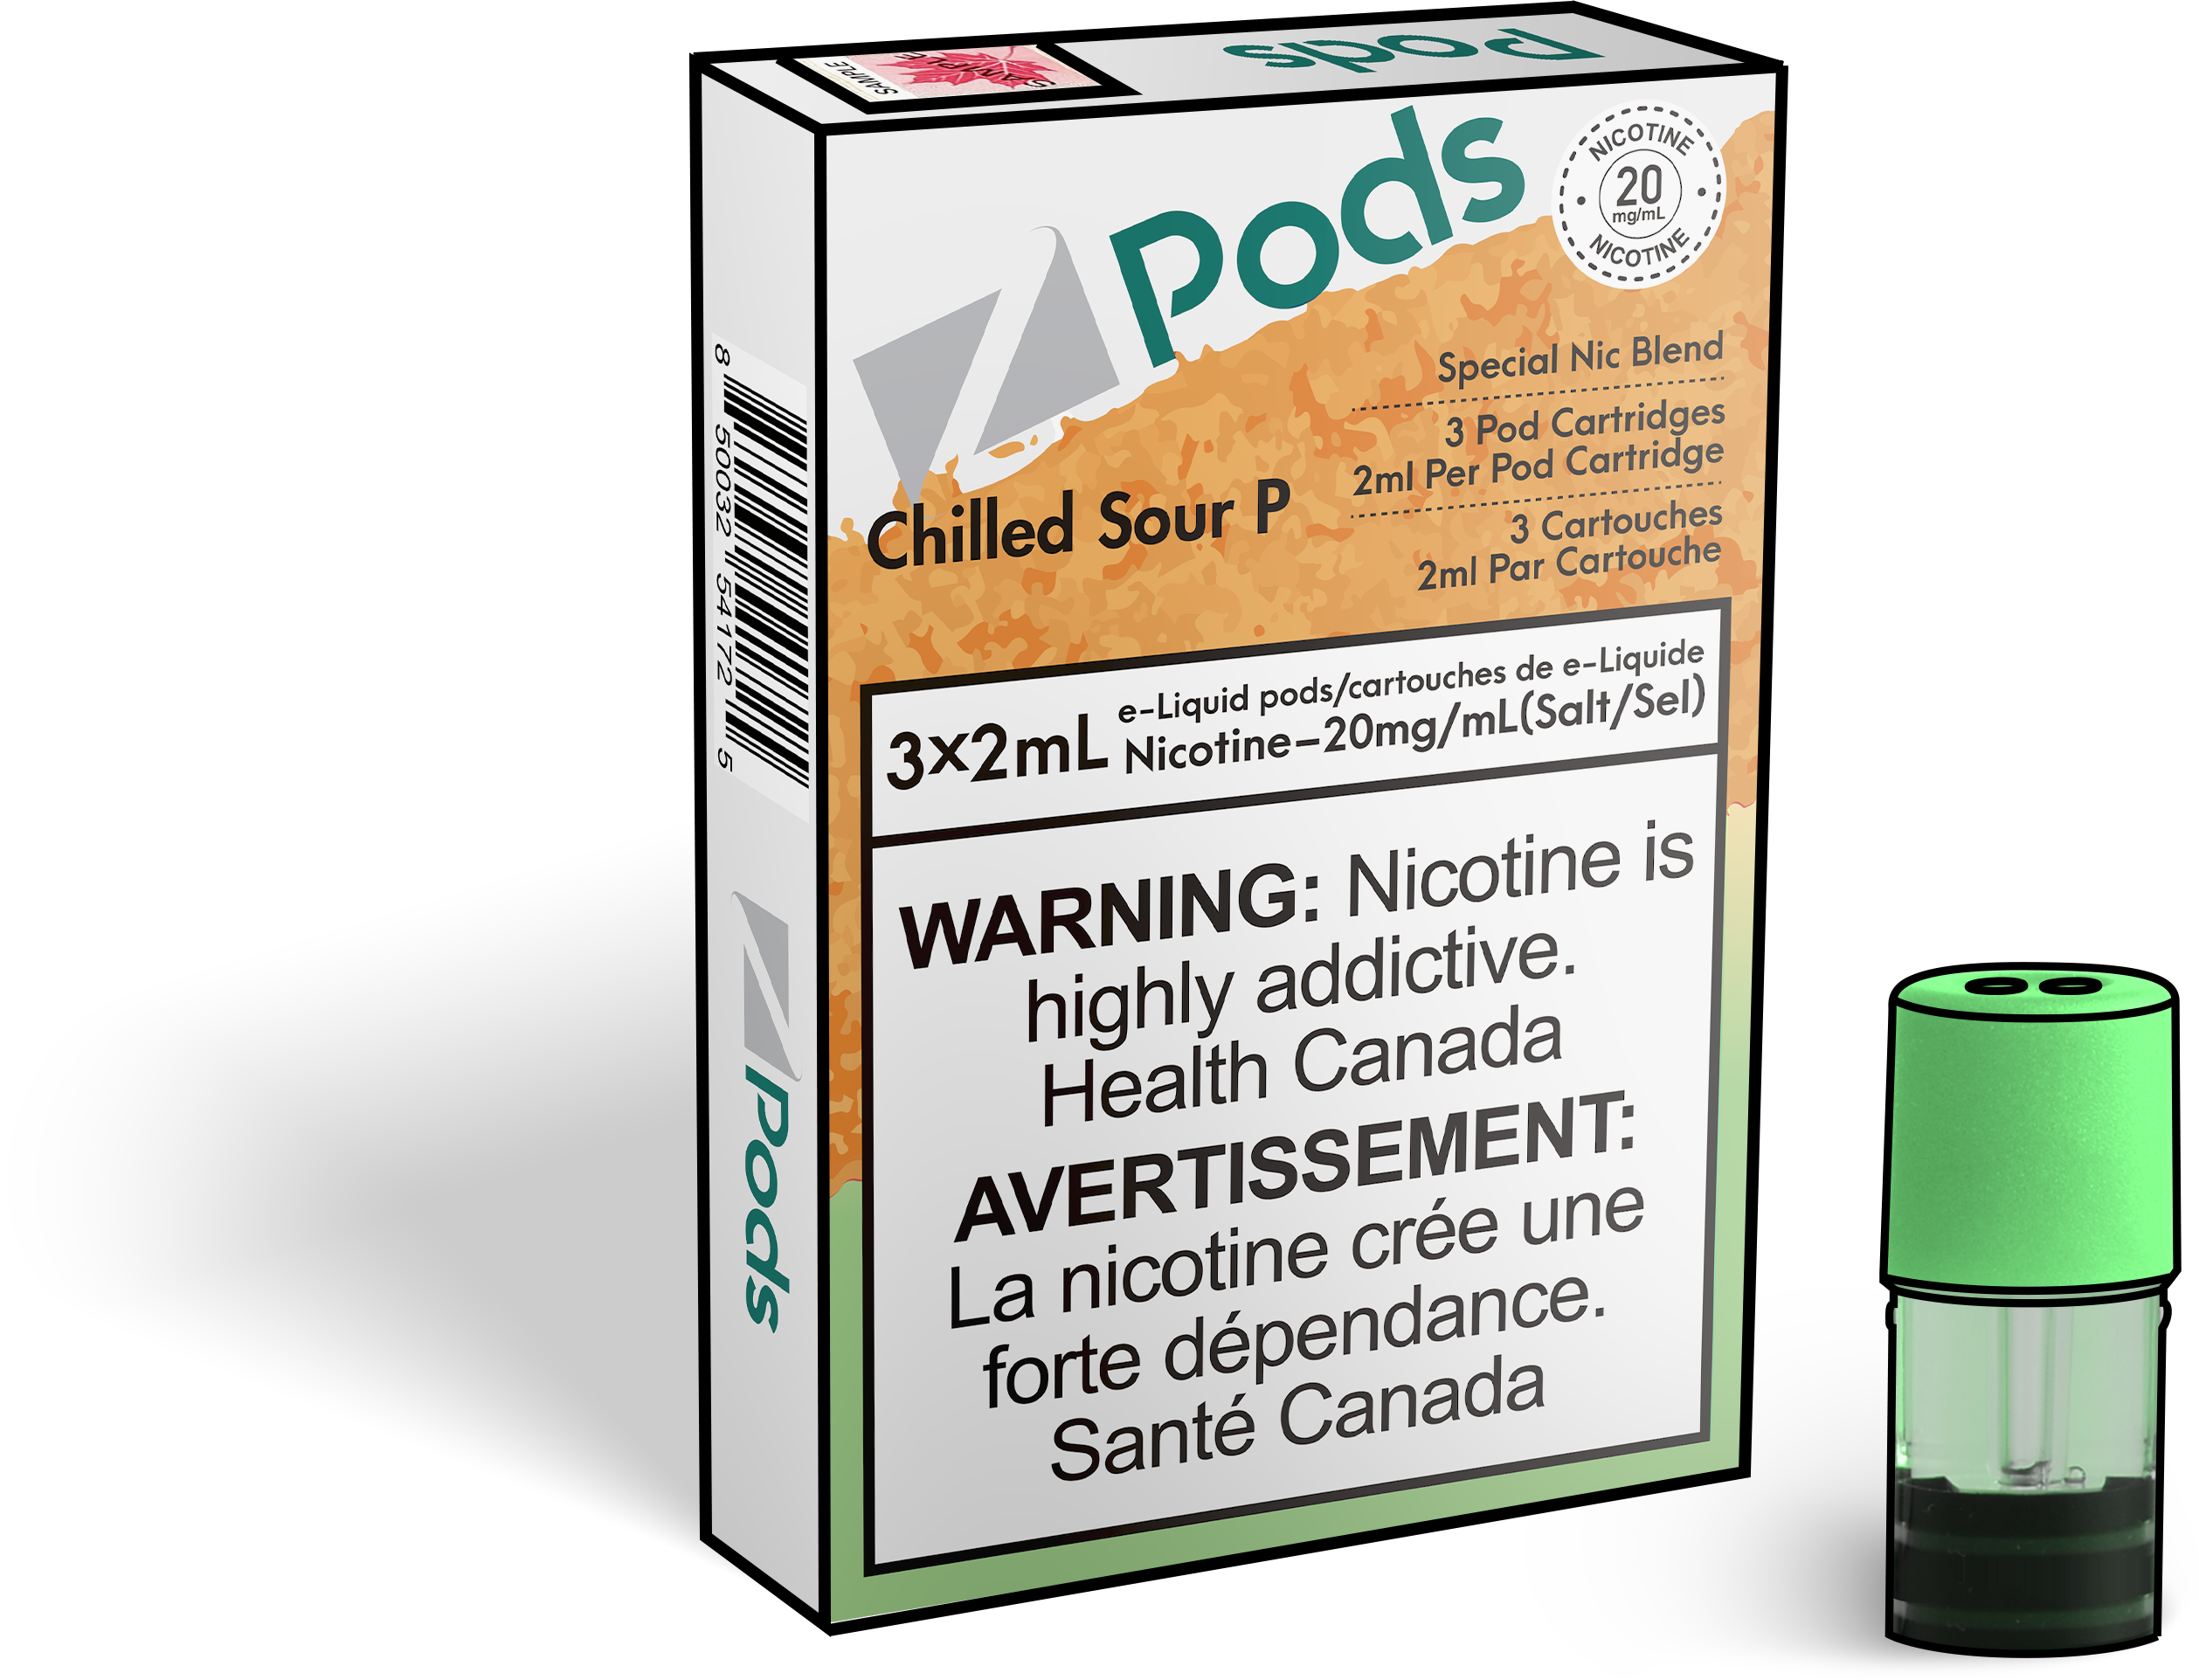 Zpods_Chilled_Sour_P_pods_Offical_Vape_Store